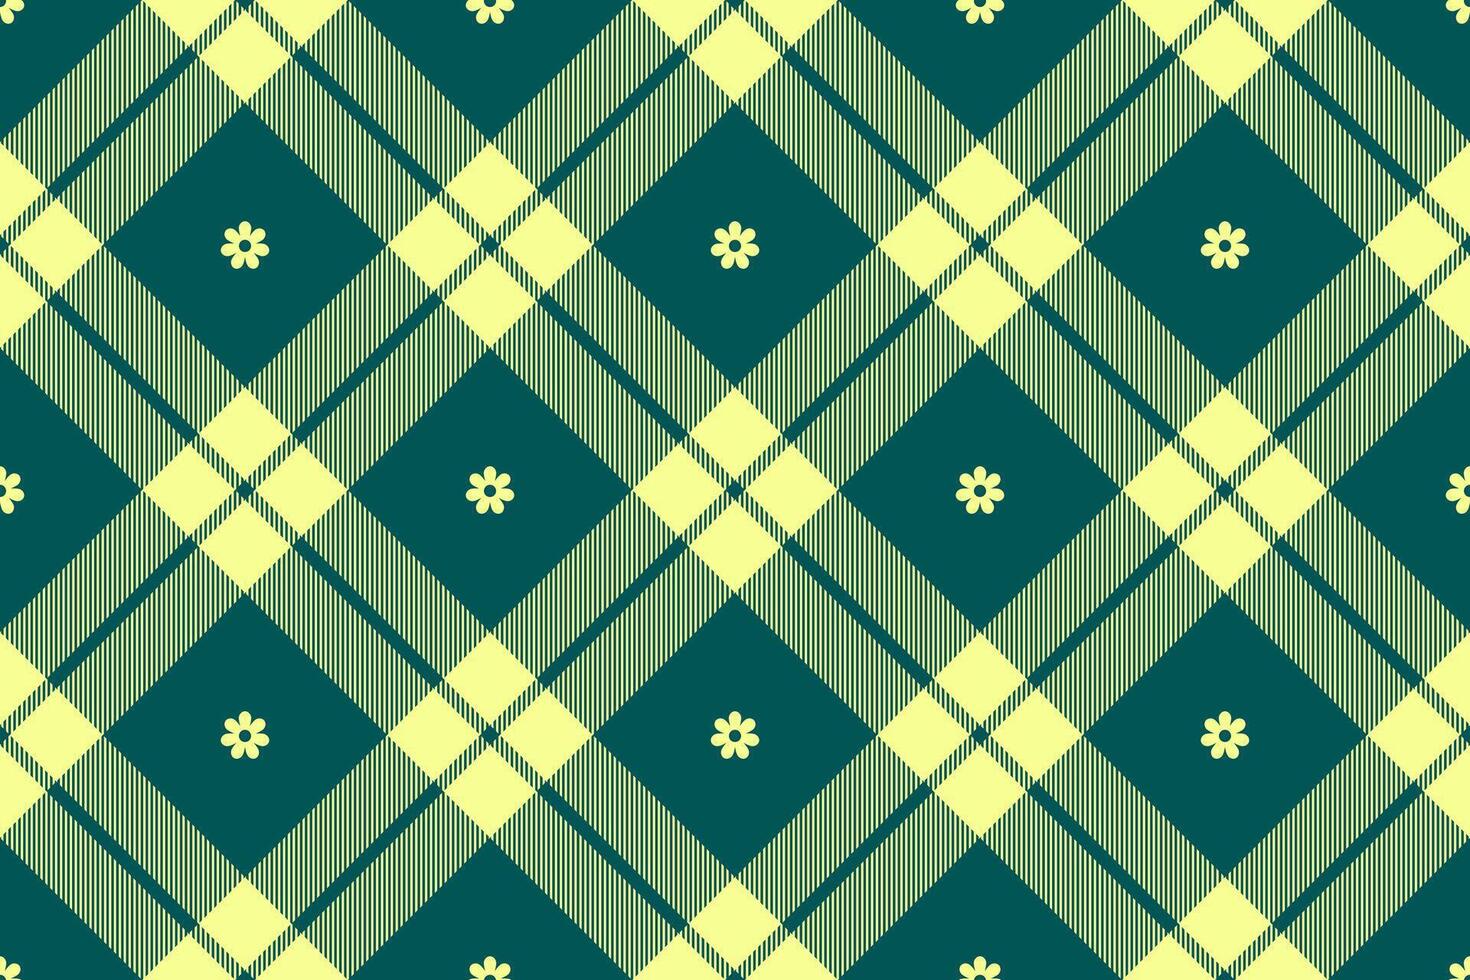 Spring gingham pattern, seamless checked plaids. Pastel vichy background for tablecloth, napkin, dress, Easter holiday textile design. vector